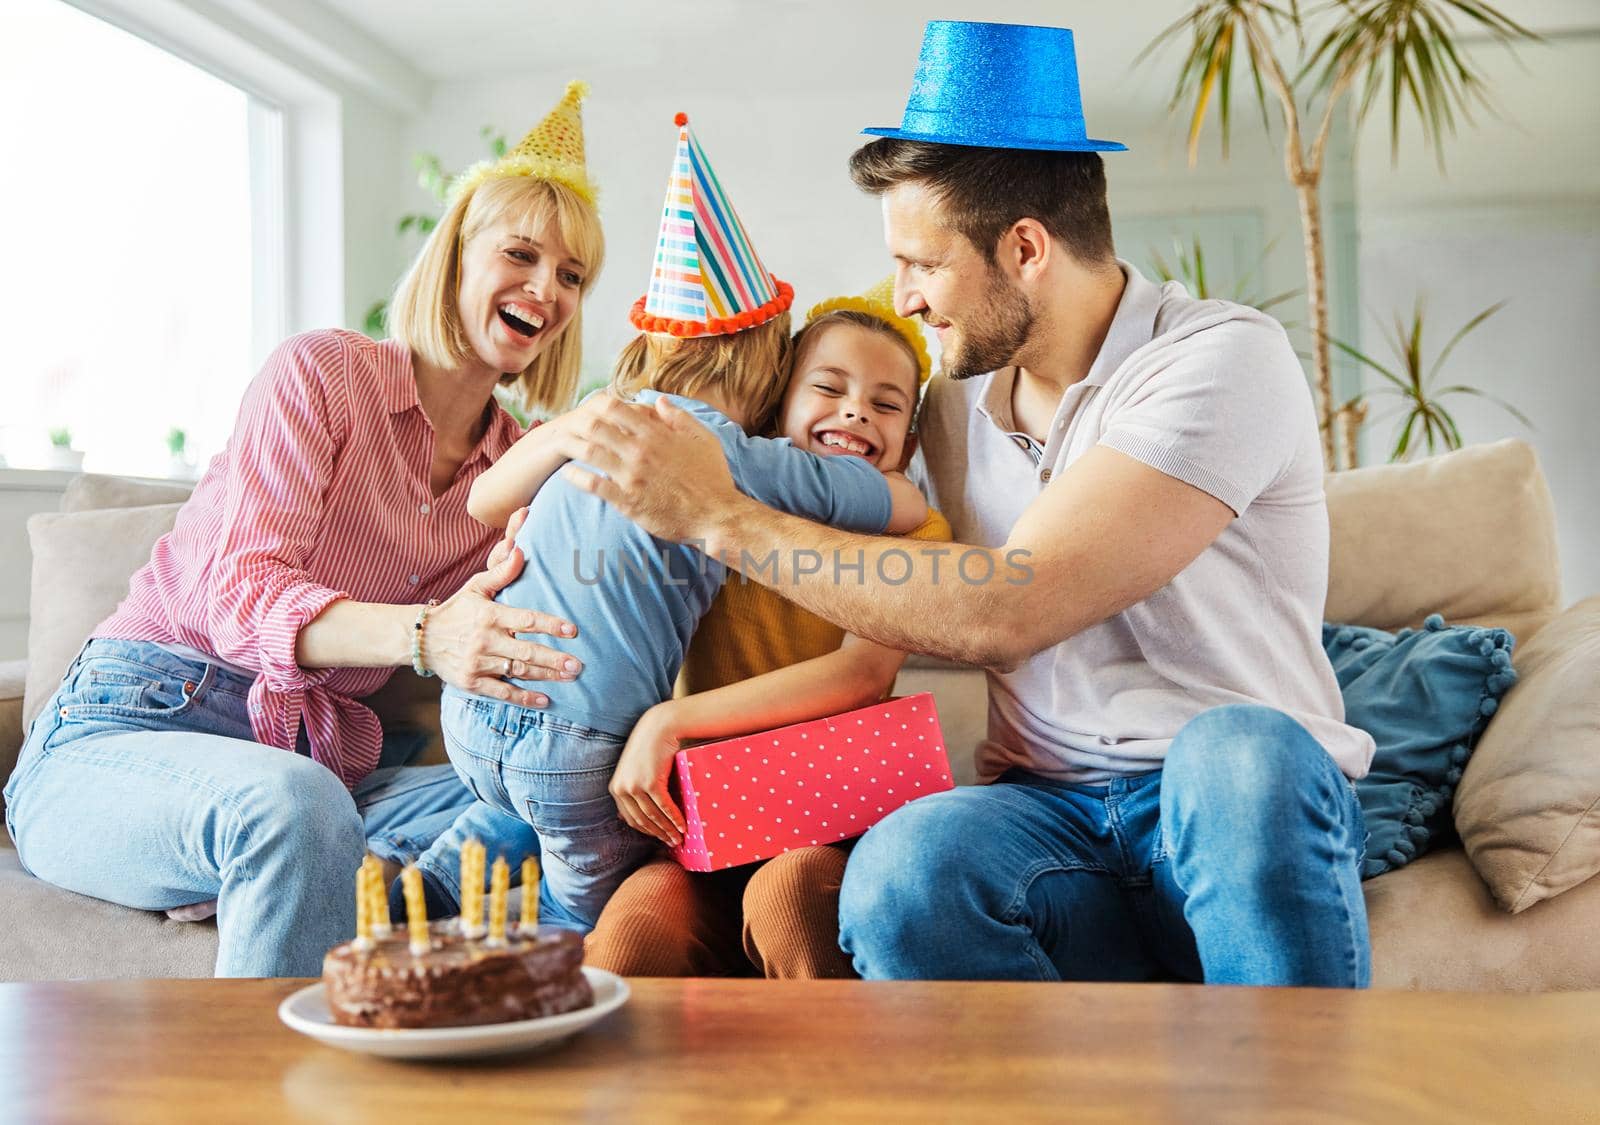 Family of four, mother, father, daughter and son having fun celebrating a birthday together with birthday cake and candles and a present at home